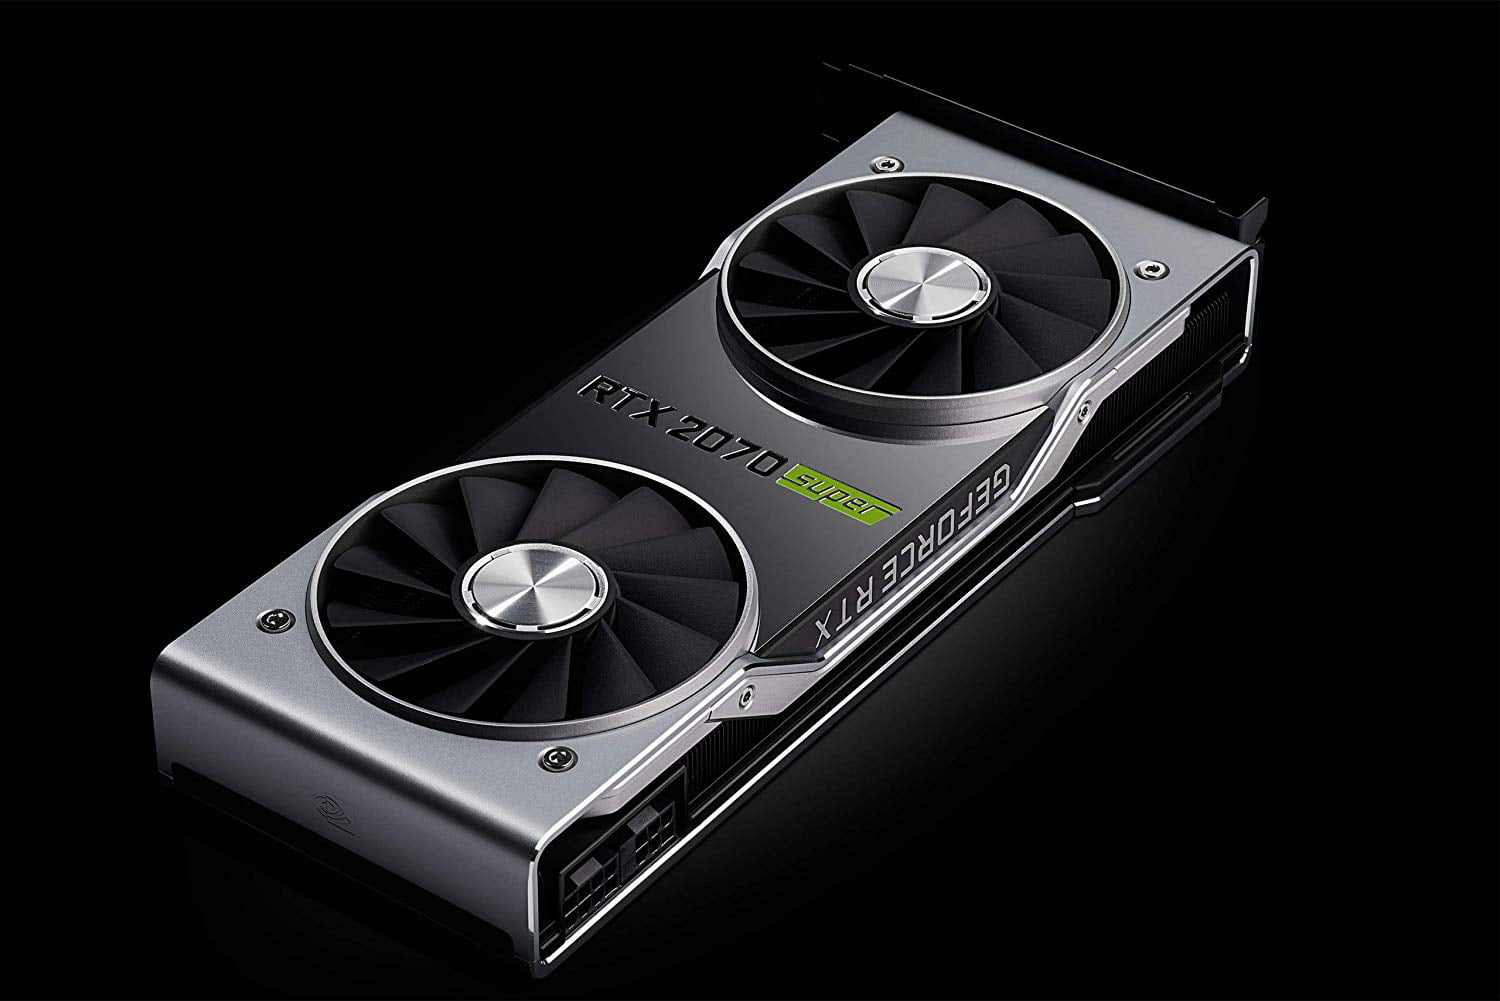 betyder Give hjælp NVIDIA GeForce RTX 2070 SUPER Founders Edition - 8GB GDDR6 1770 MHz RAM -  2560 Cores - Ray Tracing - DirectX 12 - DP/HDMI/DVI-DL - VR Ready -  Walmart.com